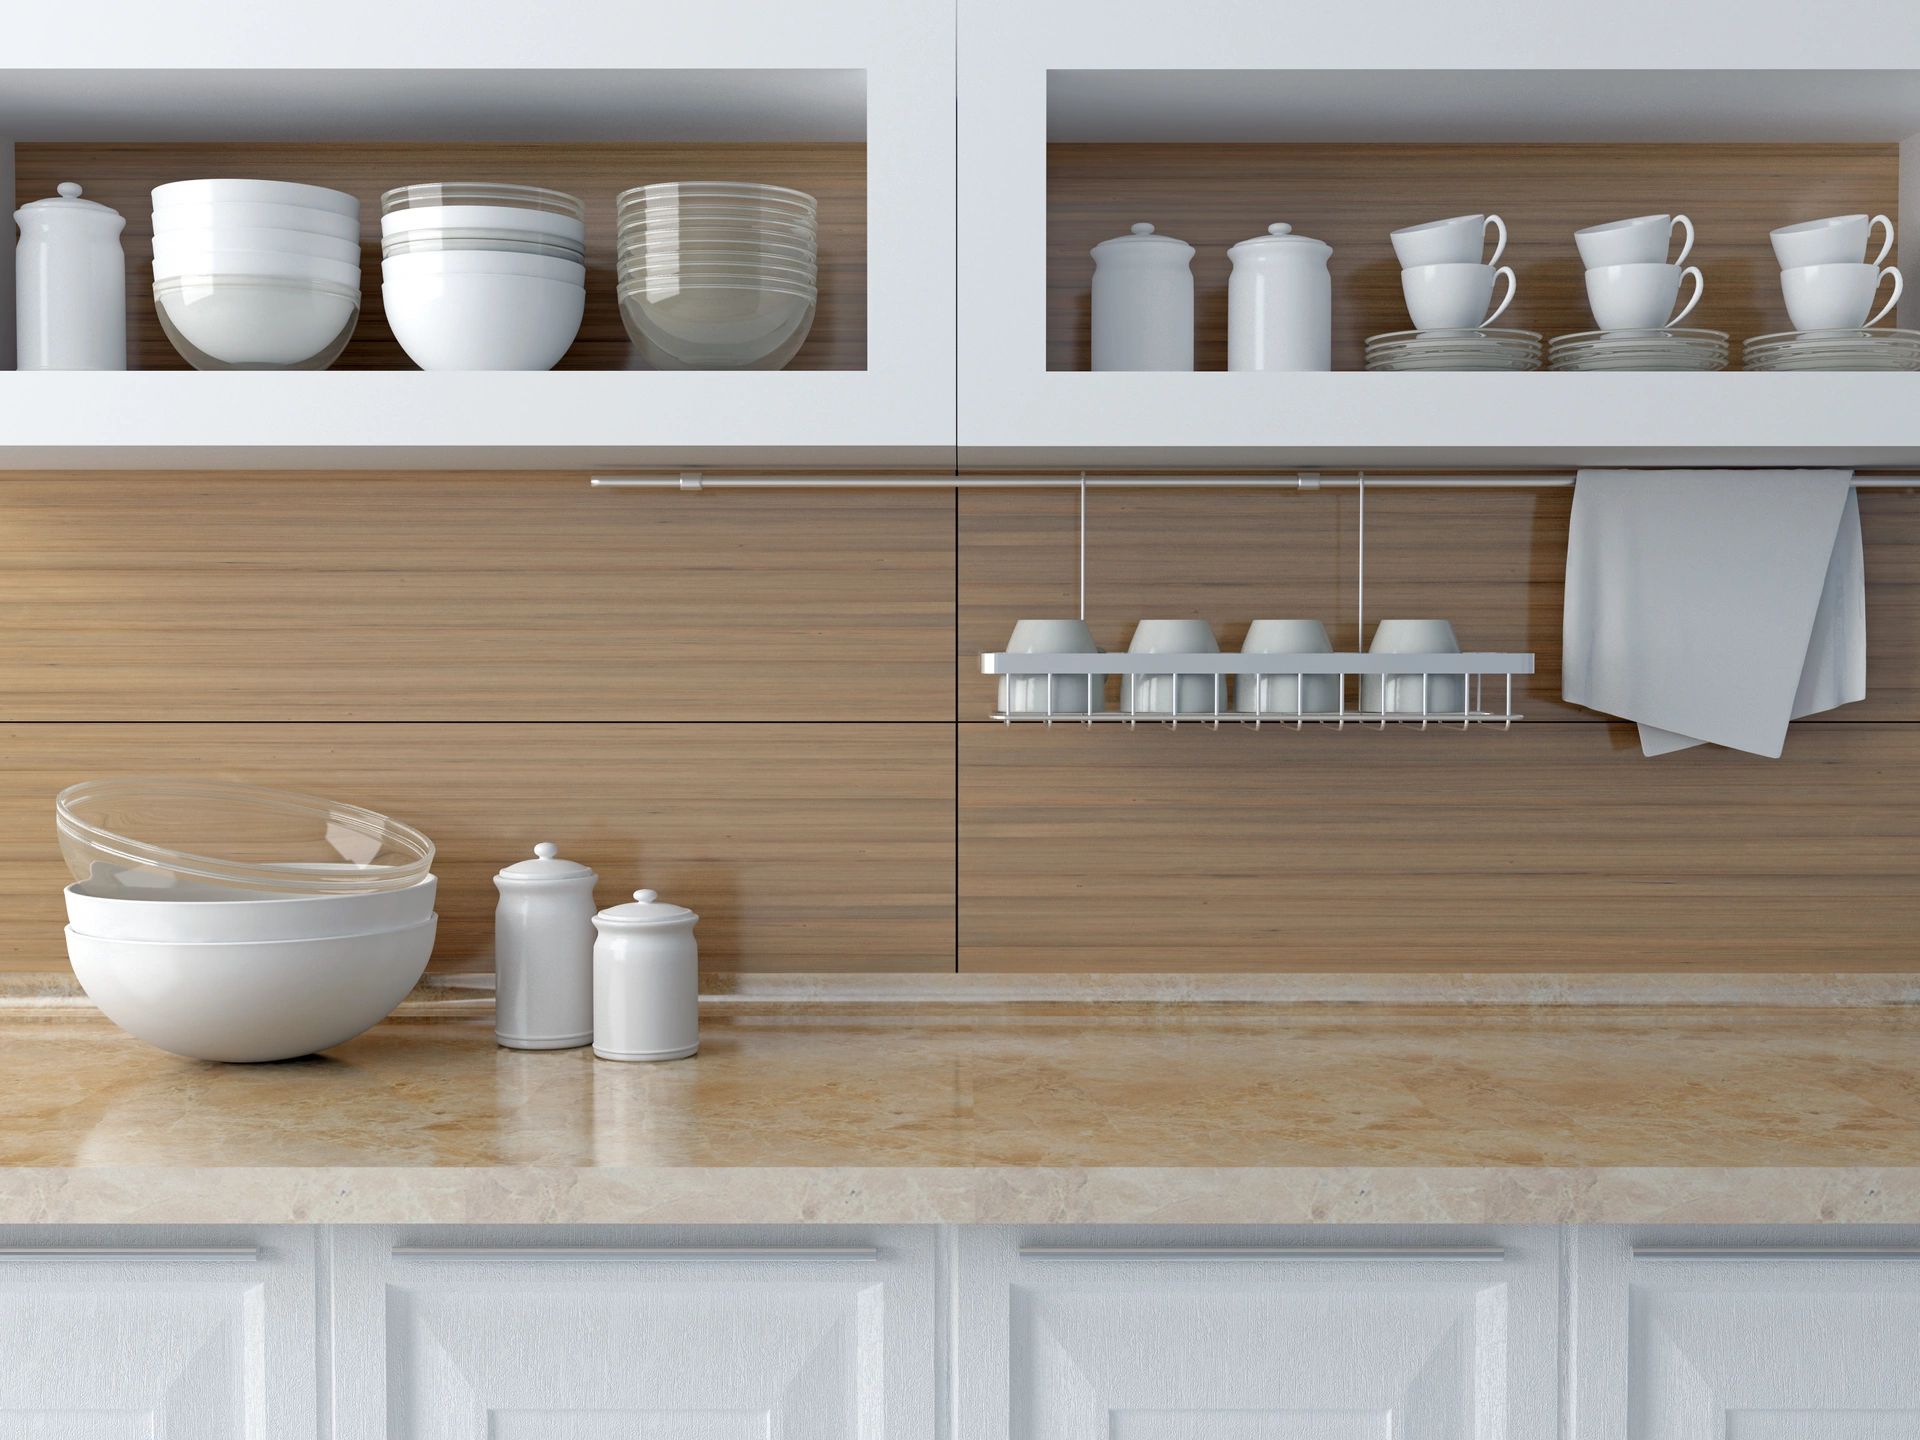 HOW TO KEEP YOUR KITCHEN TIDY